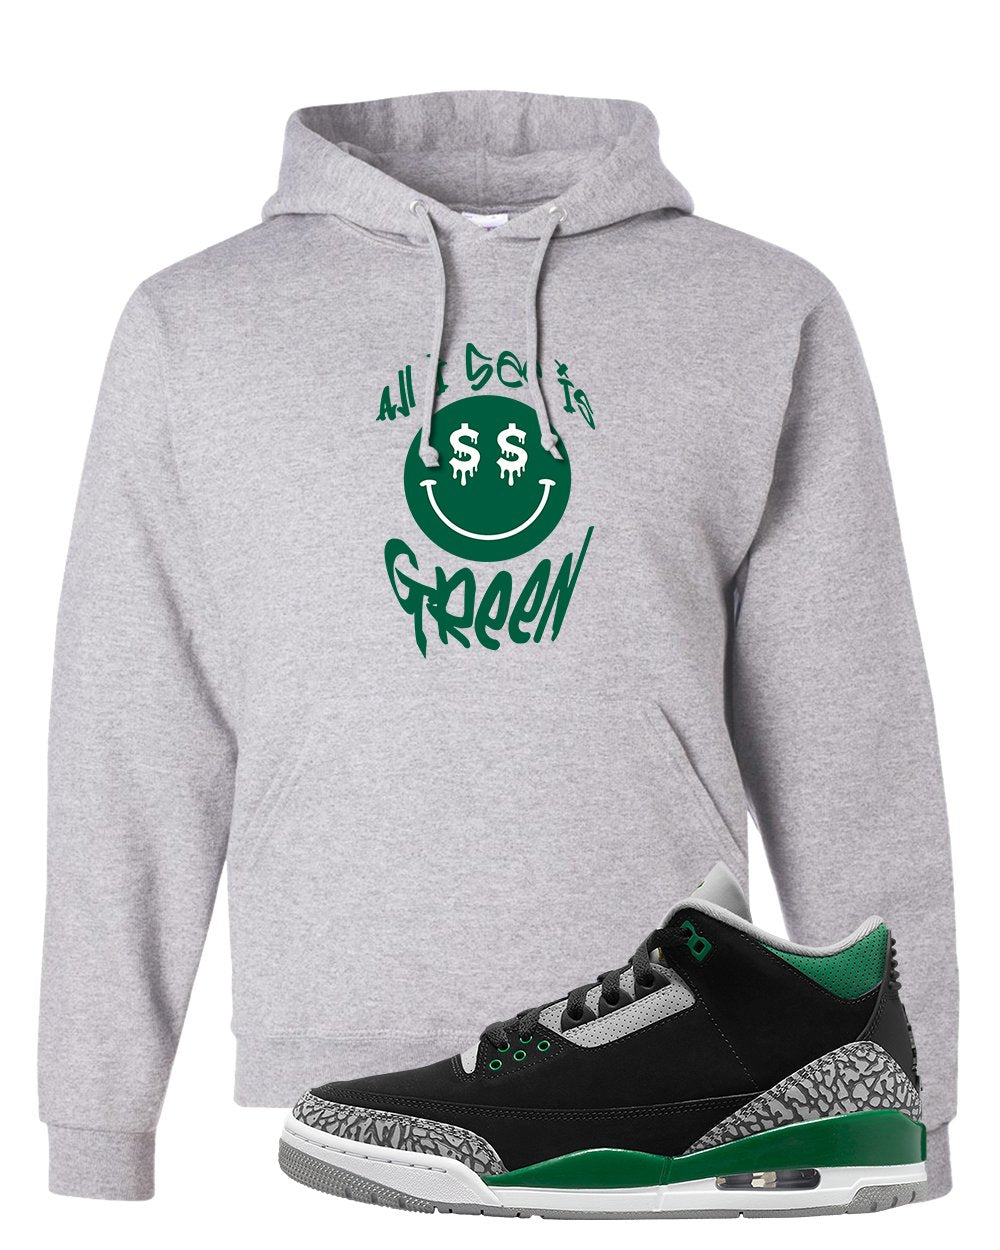 Pine Green 3s Hoodie | All I See Is Green, Ash